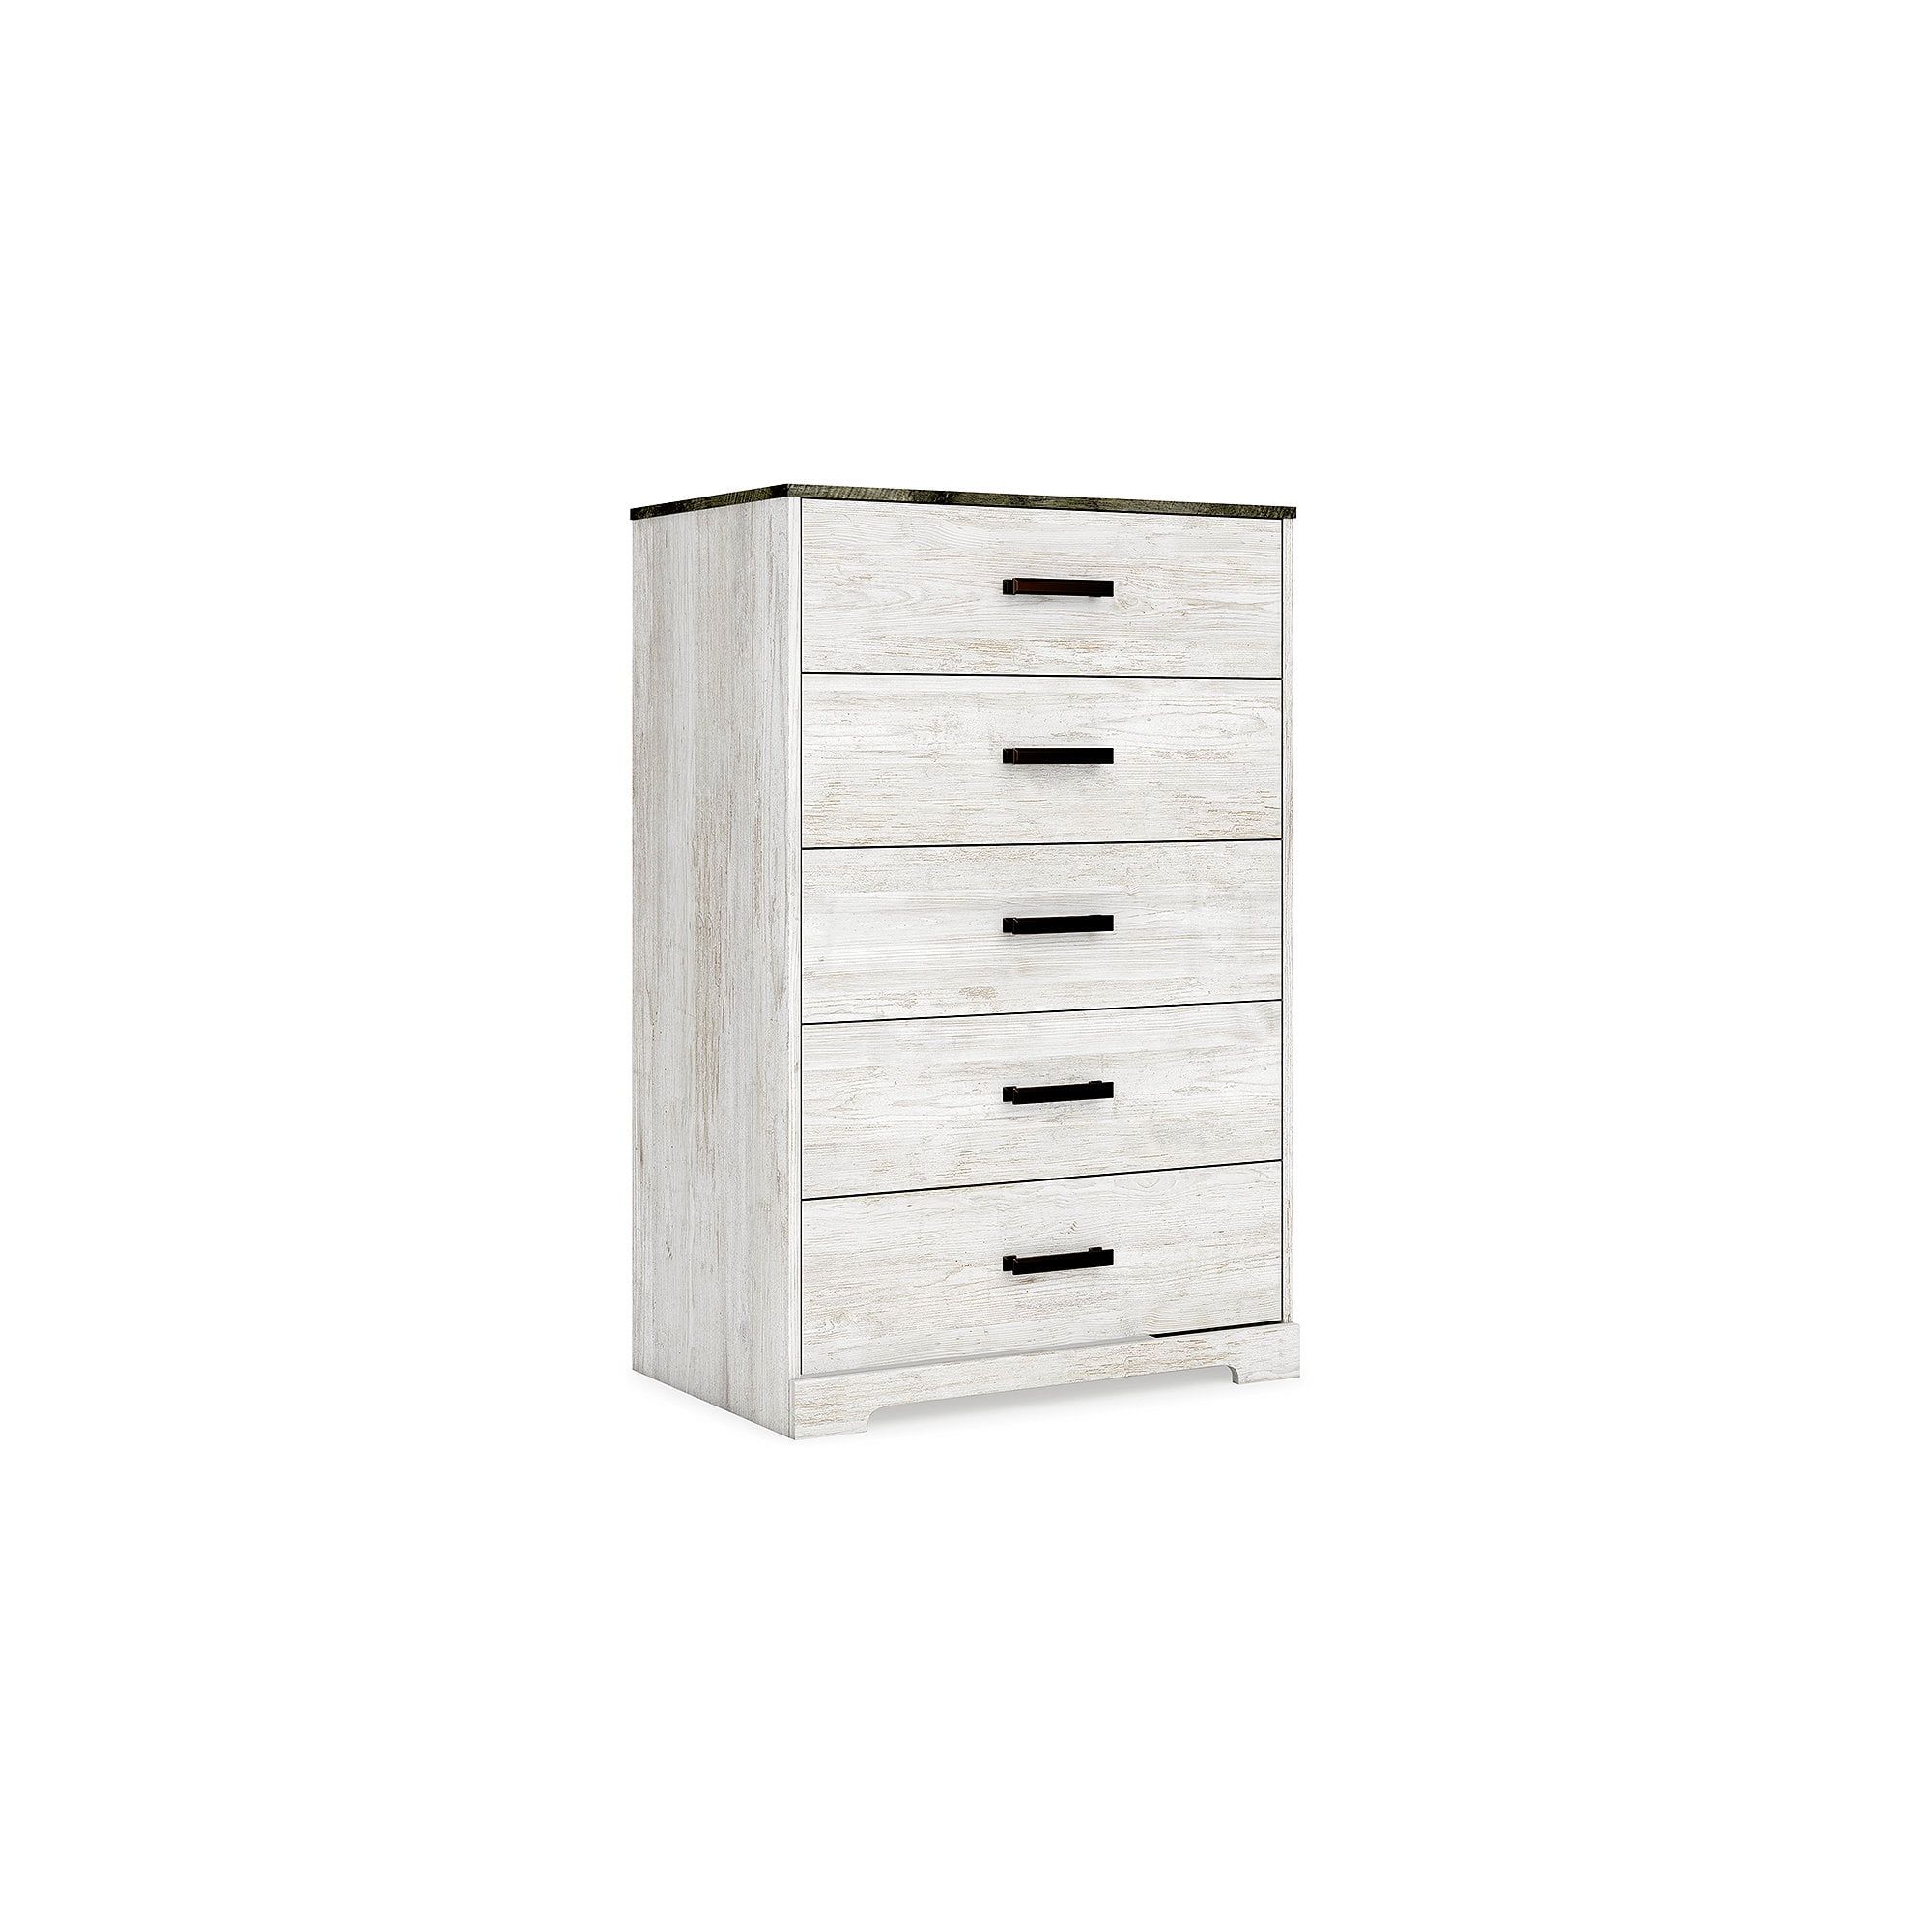 Transitional Whitewash & Charcoal Gray 5-Drawer Chest with Pewter-Tone Hardware